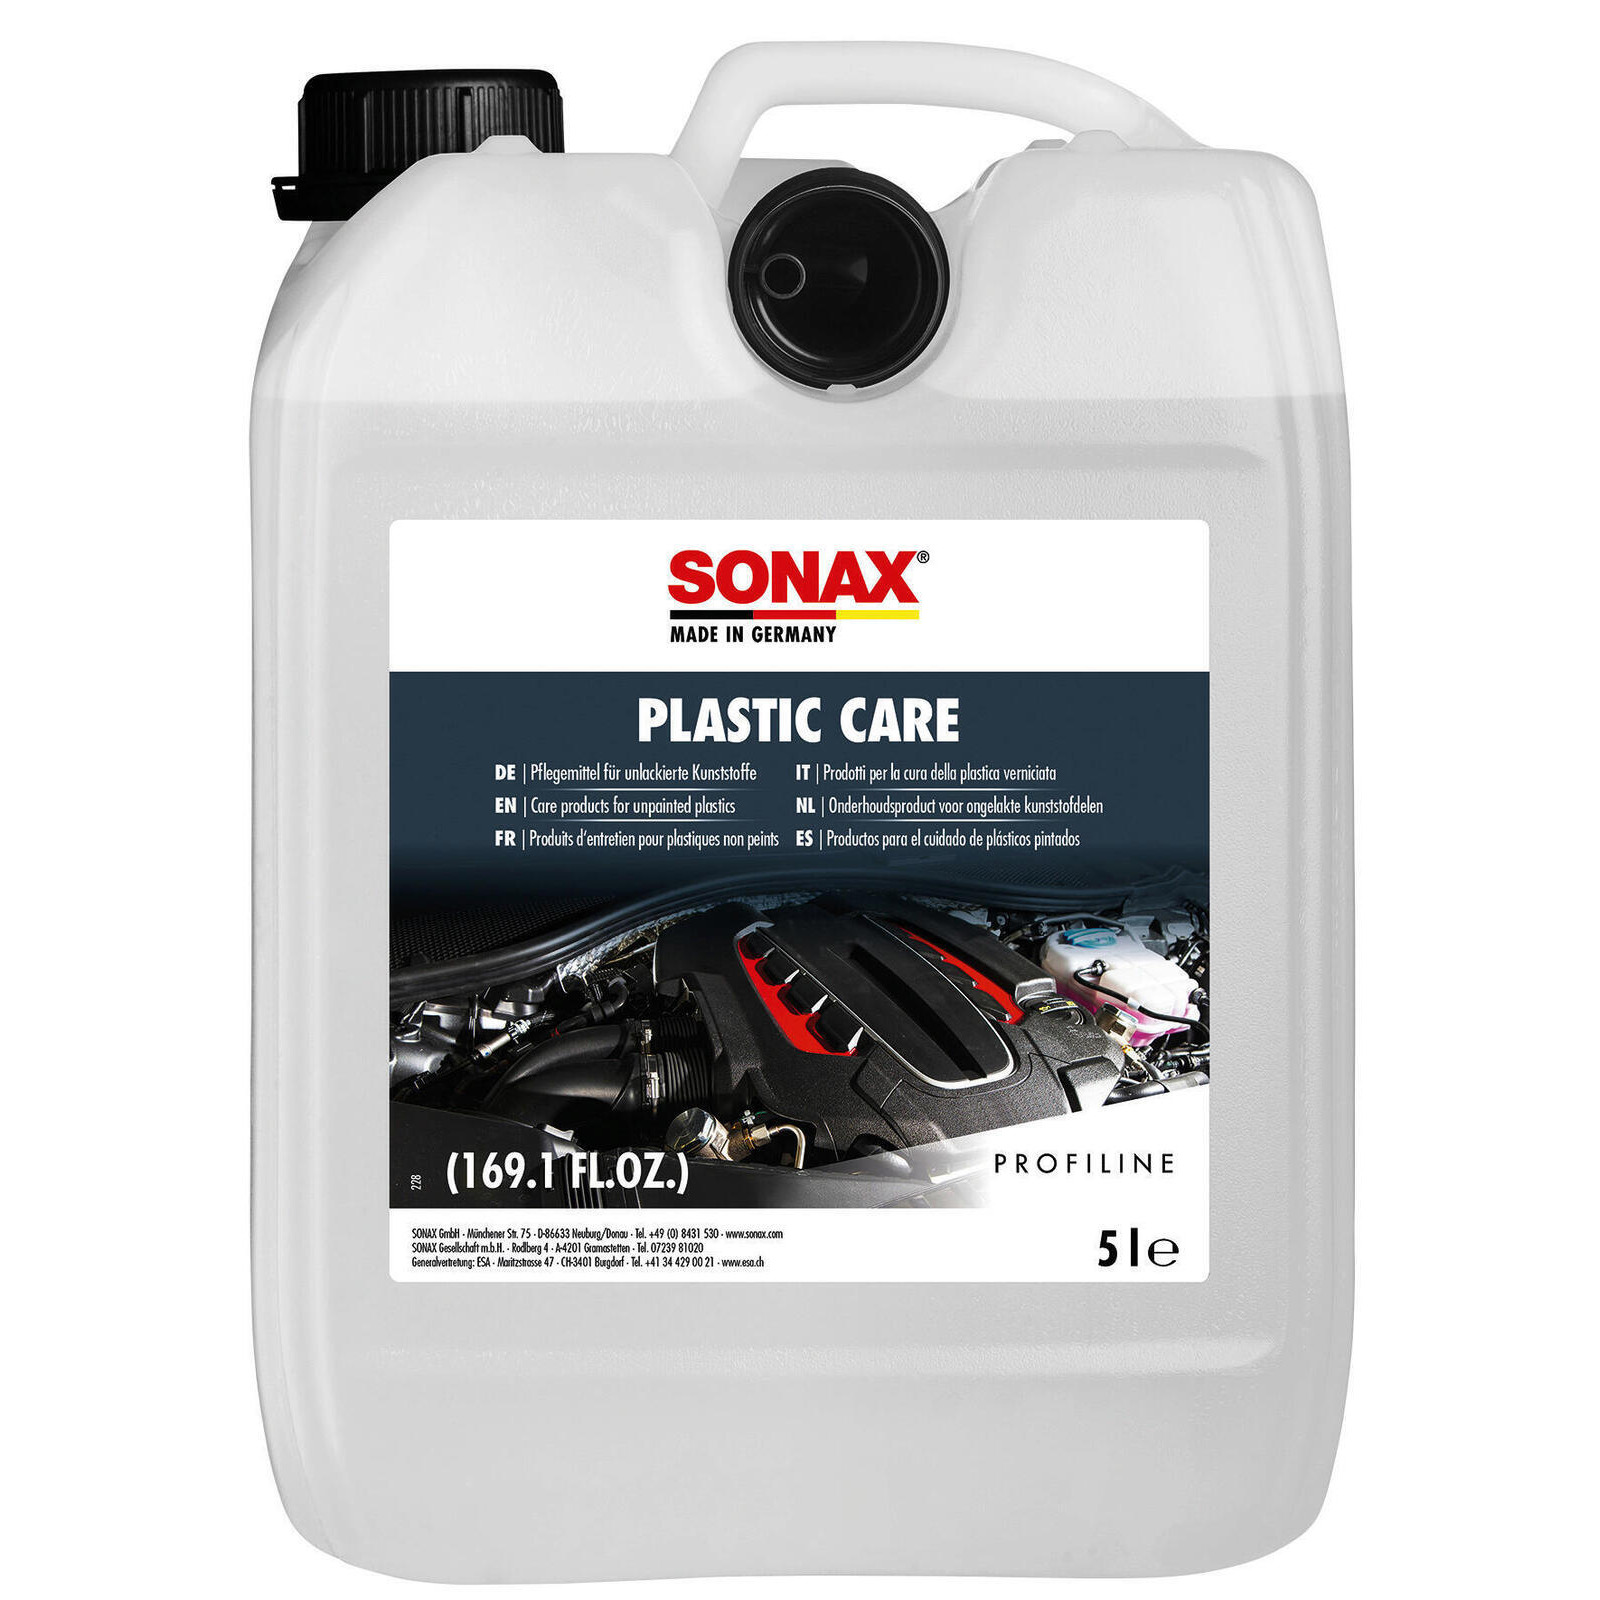 SONAX Synthetic Material Care Products ProfiLine PlasticCare